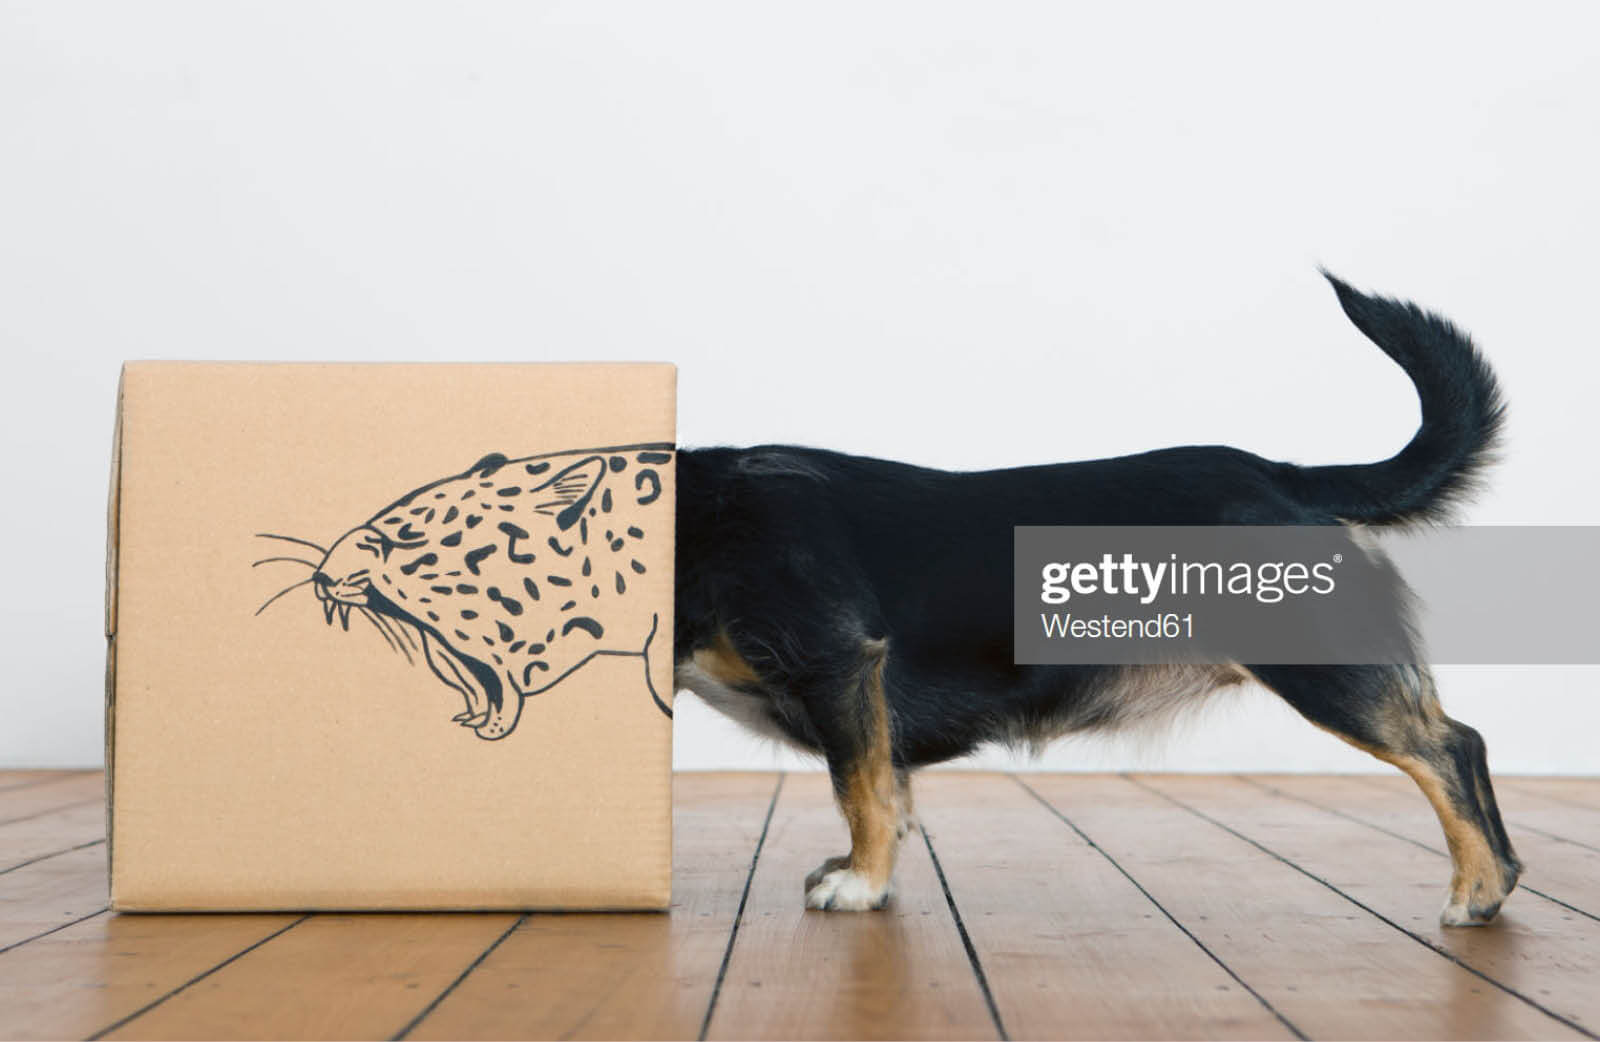 Roaring dog inside a cardboard box transforming and branding it to make it look like a leopard in the digital jungle